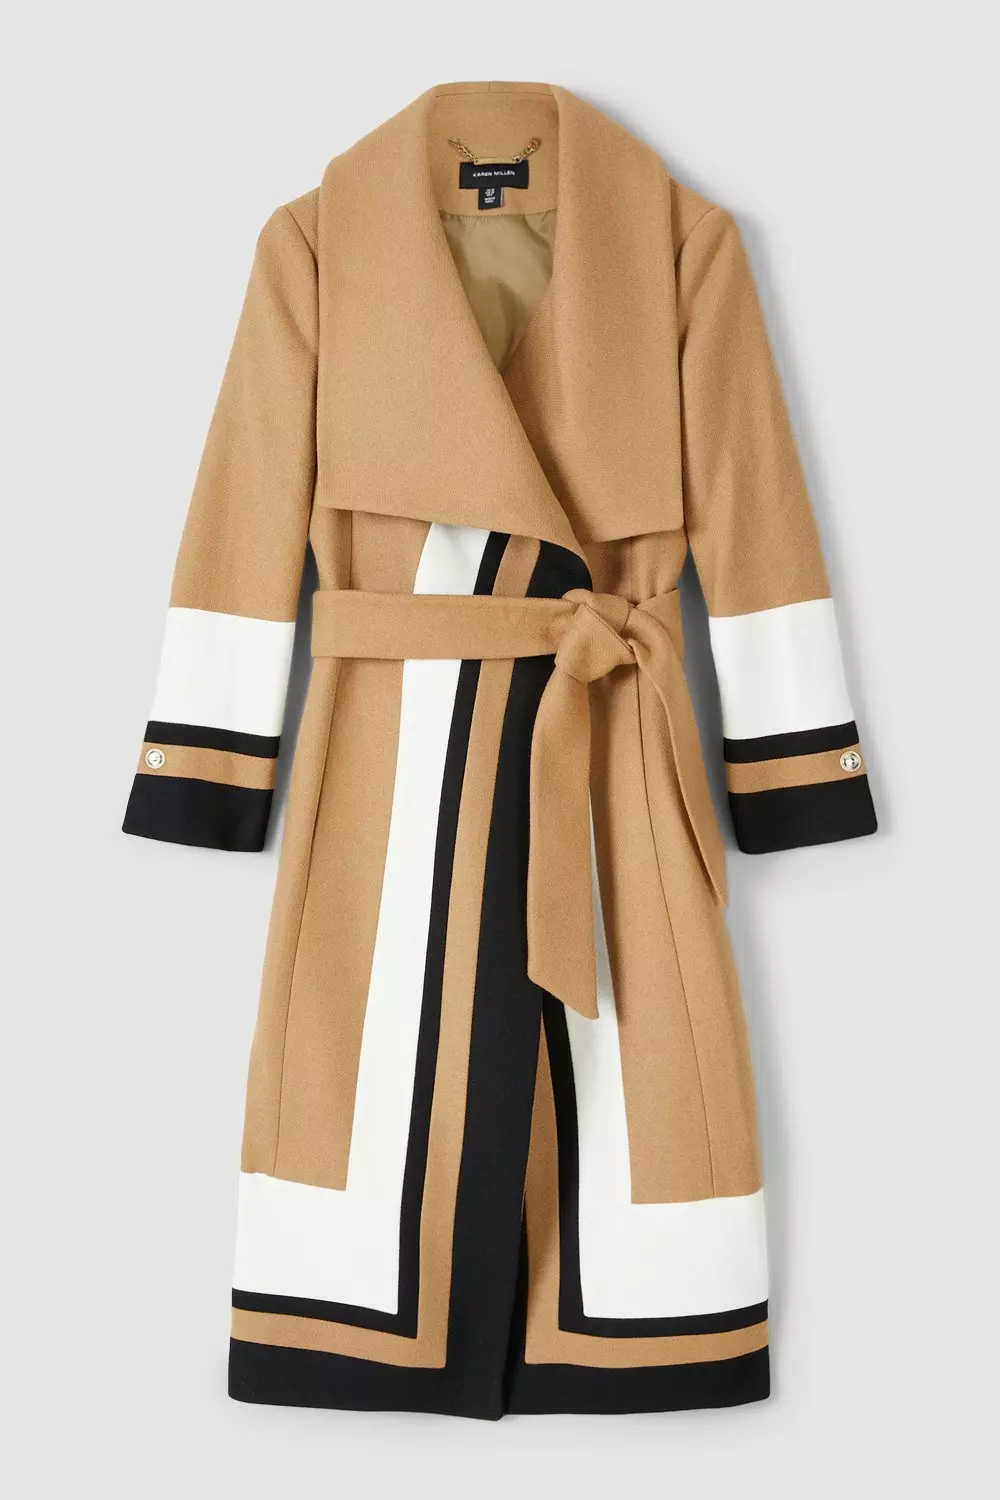 Rabato Wrap Belted Wool-Blend Coat in Ivory - Retro, Indie and